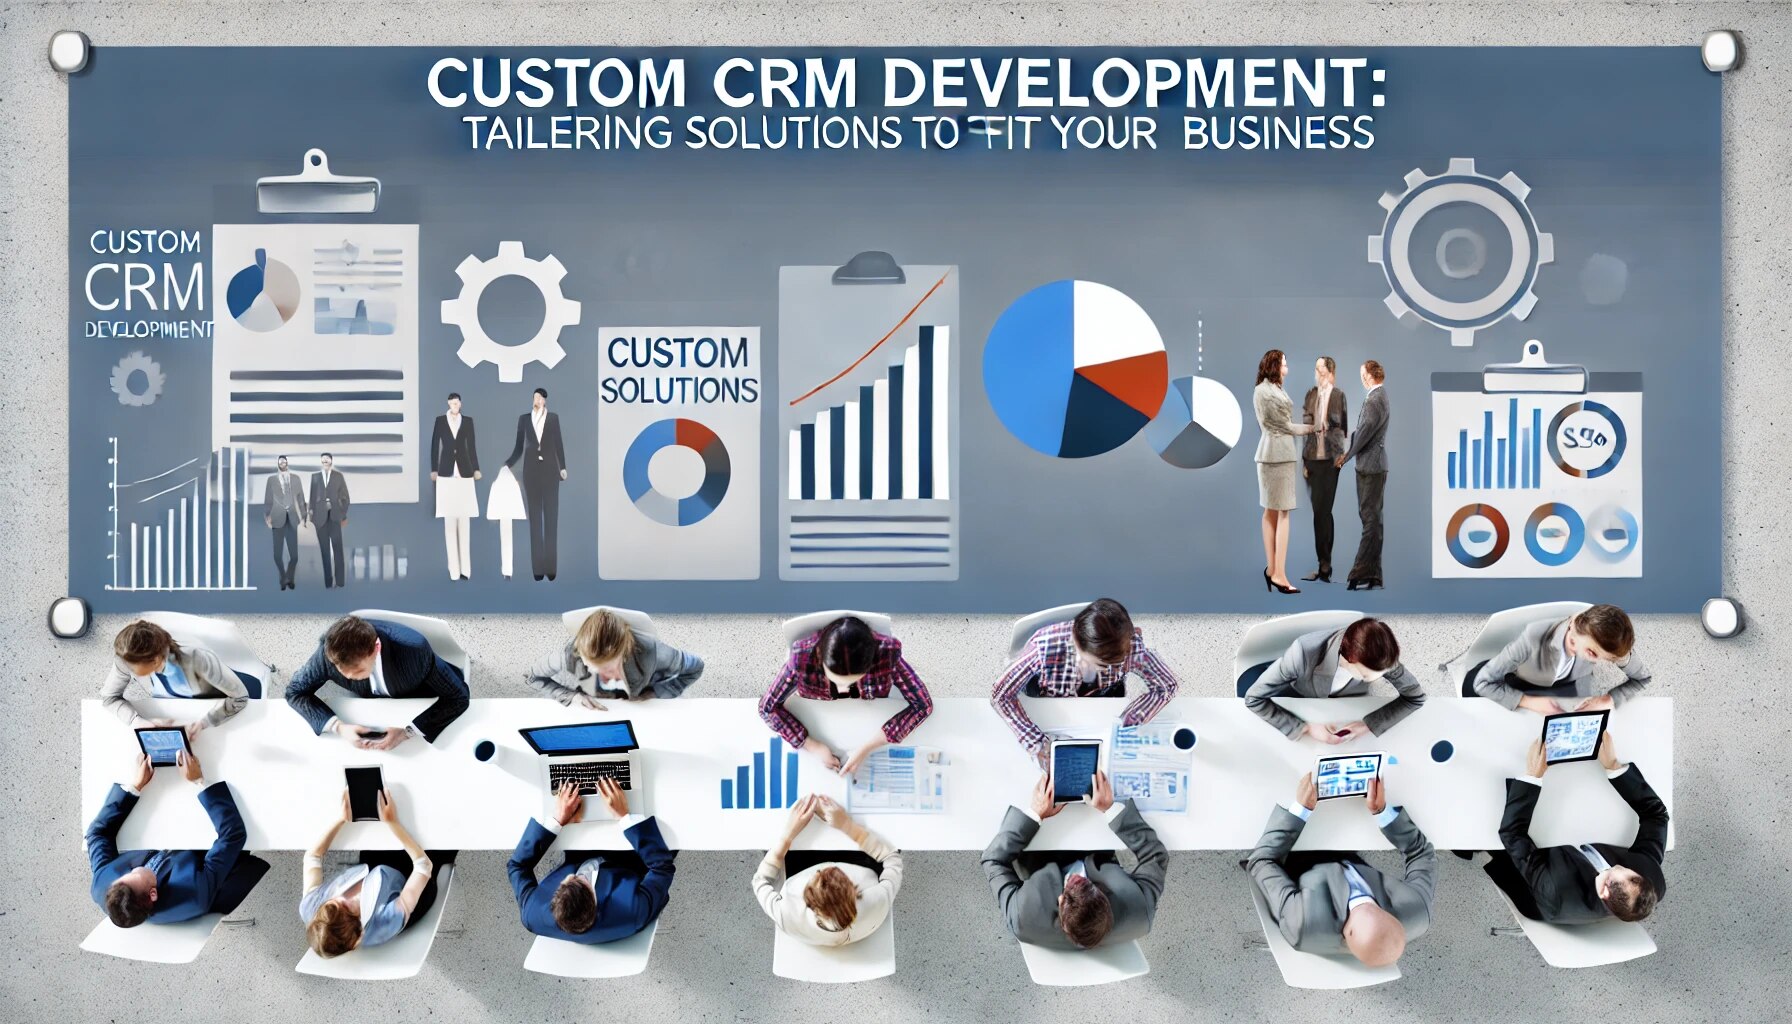 Custom CRM Development Tailoring Solutions to Fit Your Business Needs